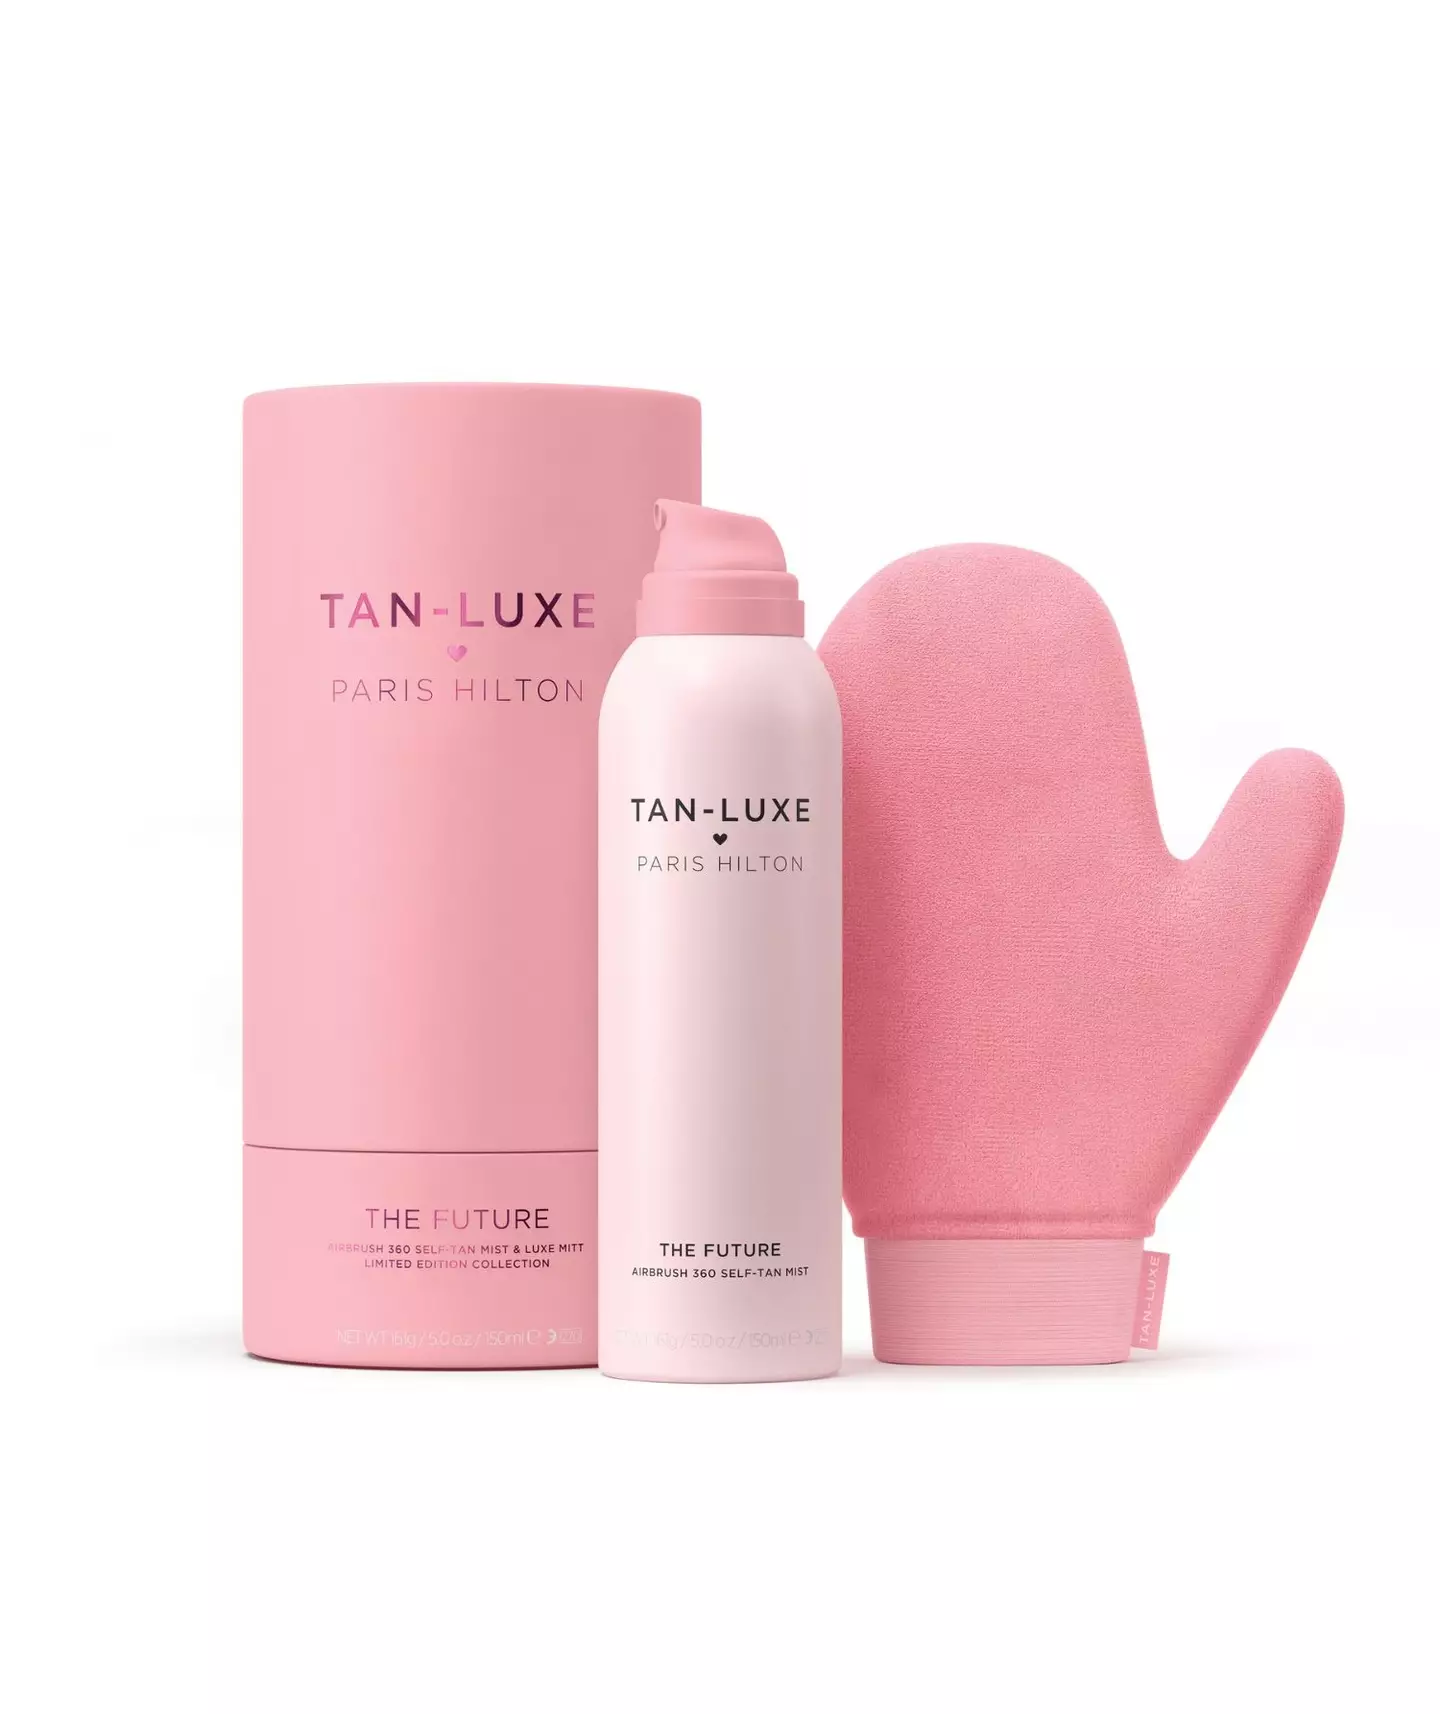 The clear tanning mist also comes with a mitt.